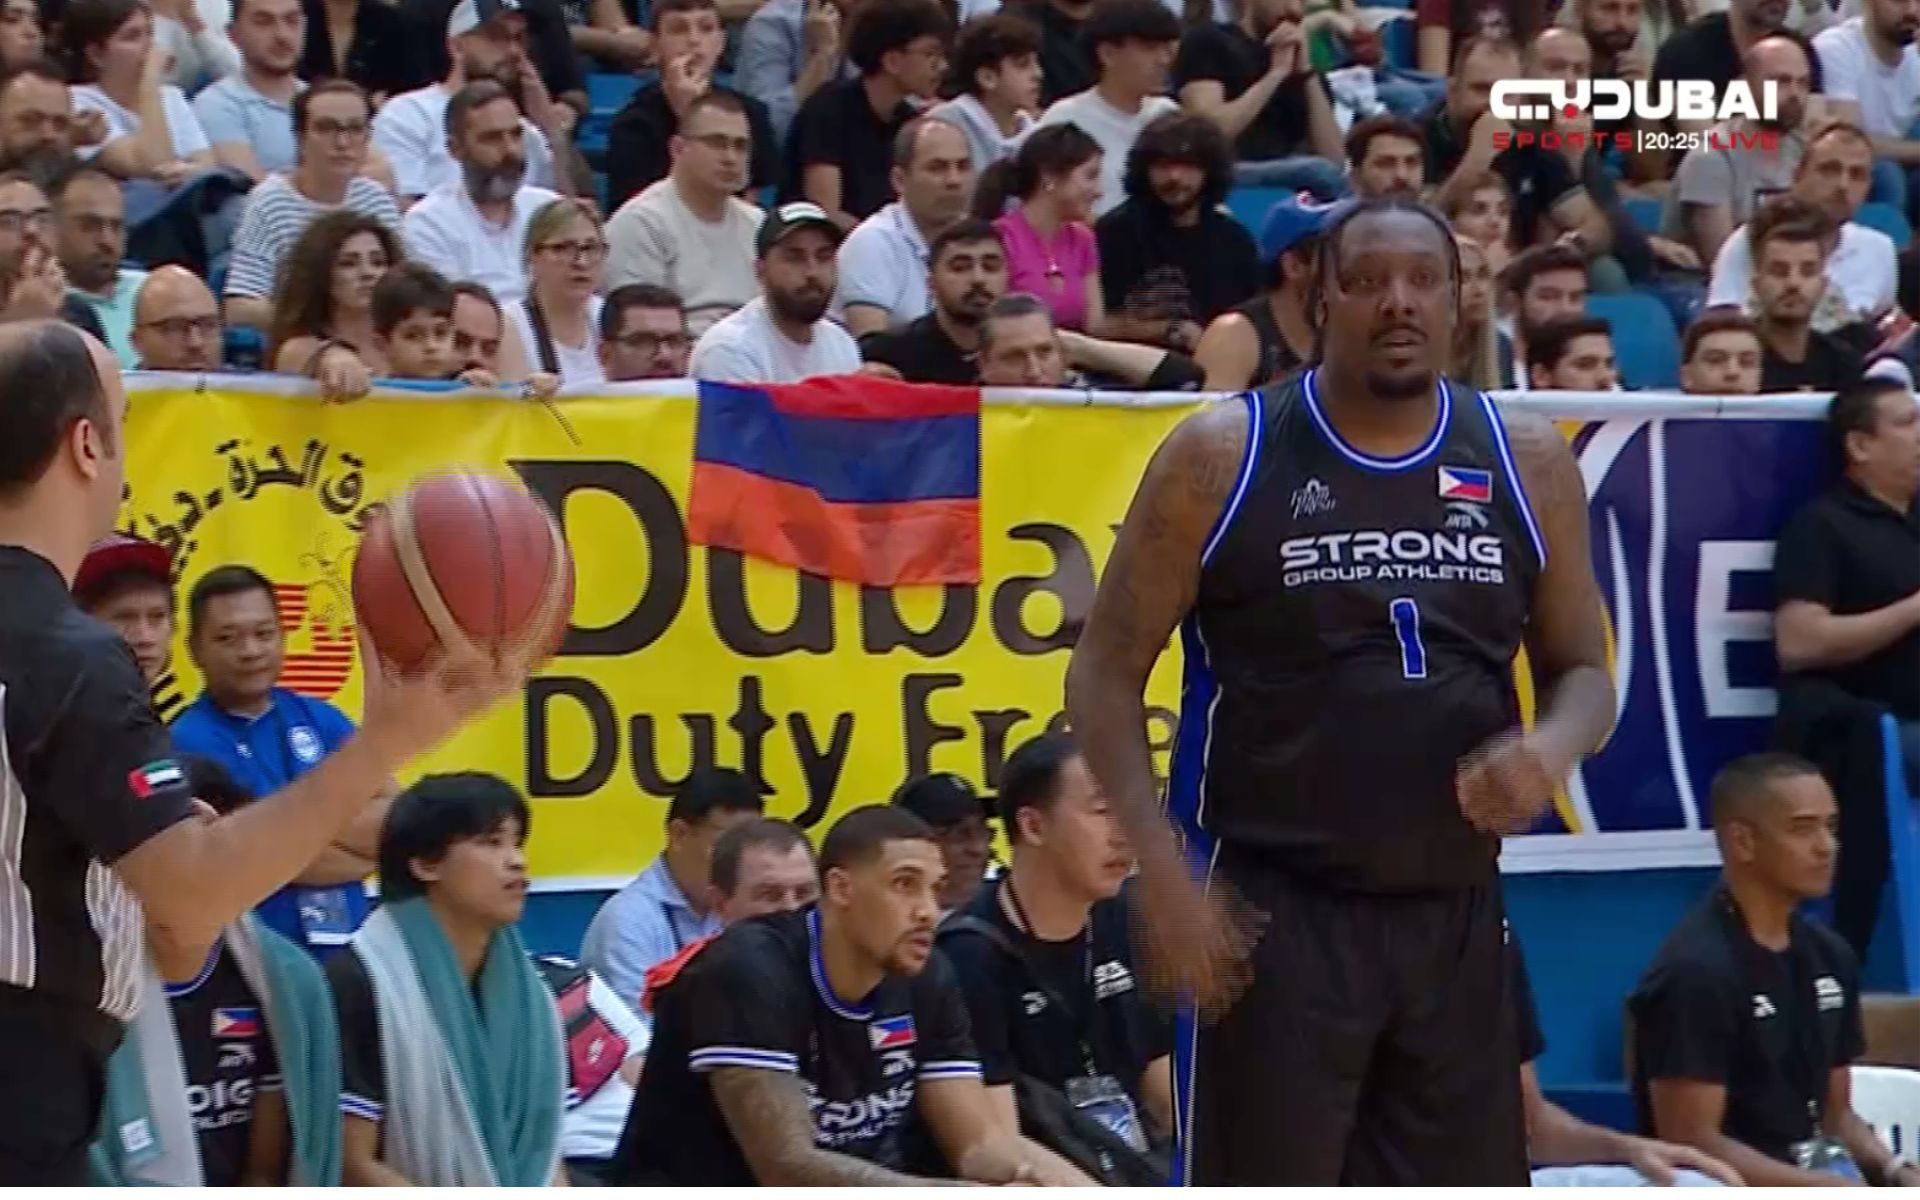 Andray Blatche clutch triple barrage in Strong Group win proves unmatchable NBA caliber